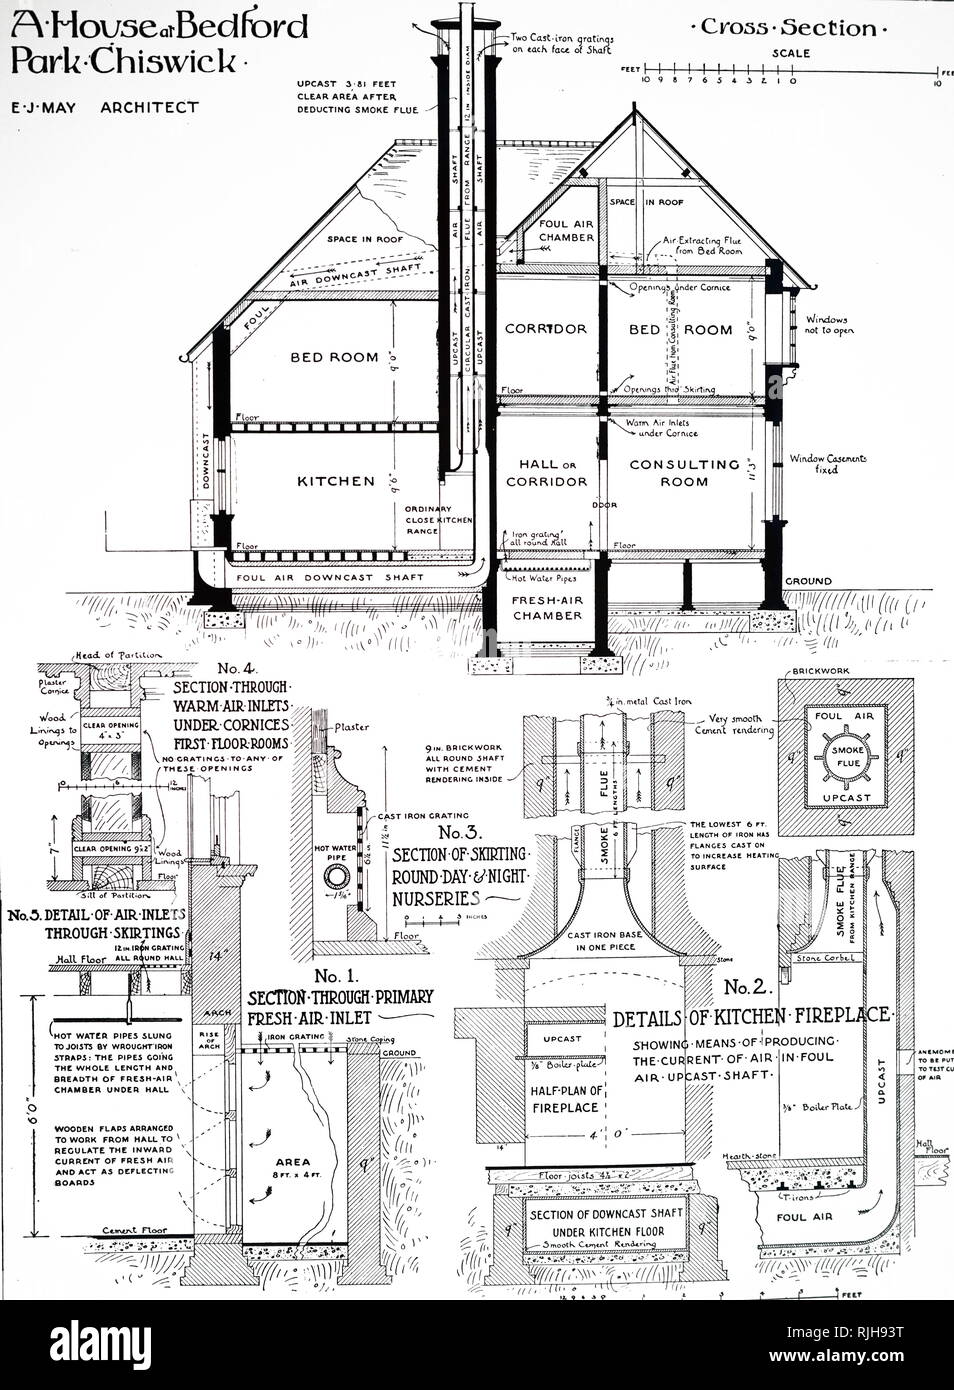 An engraving depicting a sectional view of a house built by Edward John May, for Dr Hogg, which was heated and ventilated by hot air. Fresh air was drawn in through the basement, and hot pipes were used to heat the house through gratings in the floors downstairs and by vents in the upstairs rooms. The flume for the kitchen chimney provided heat to create a draught for extracting exhausted air. Edward John May (1853-1941) an English architect. Dated 19th century Stock Photo